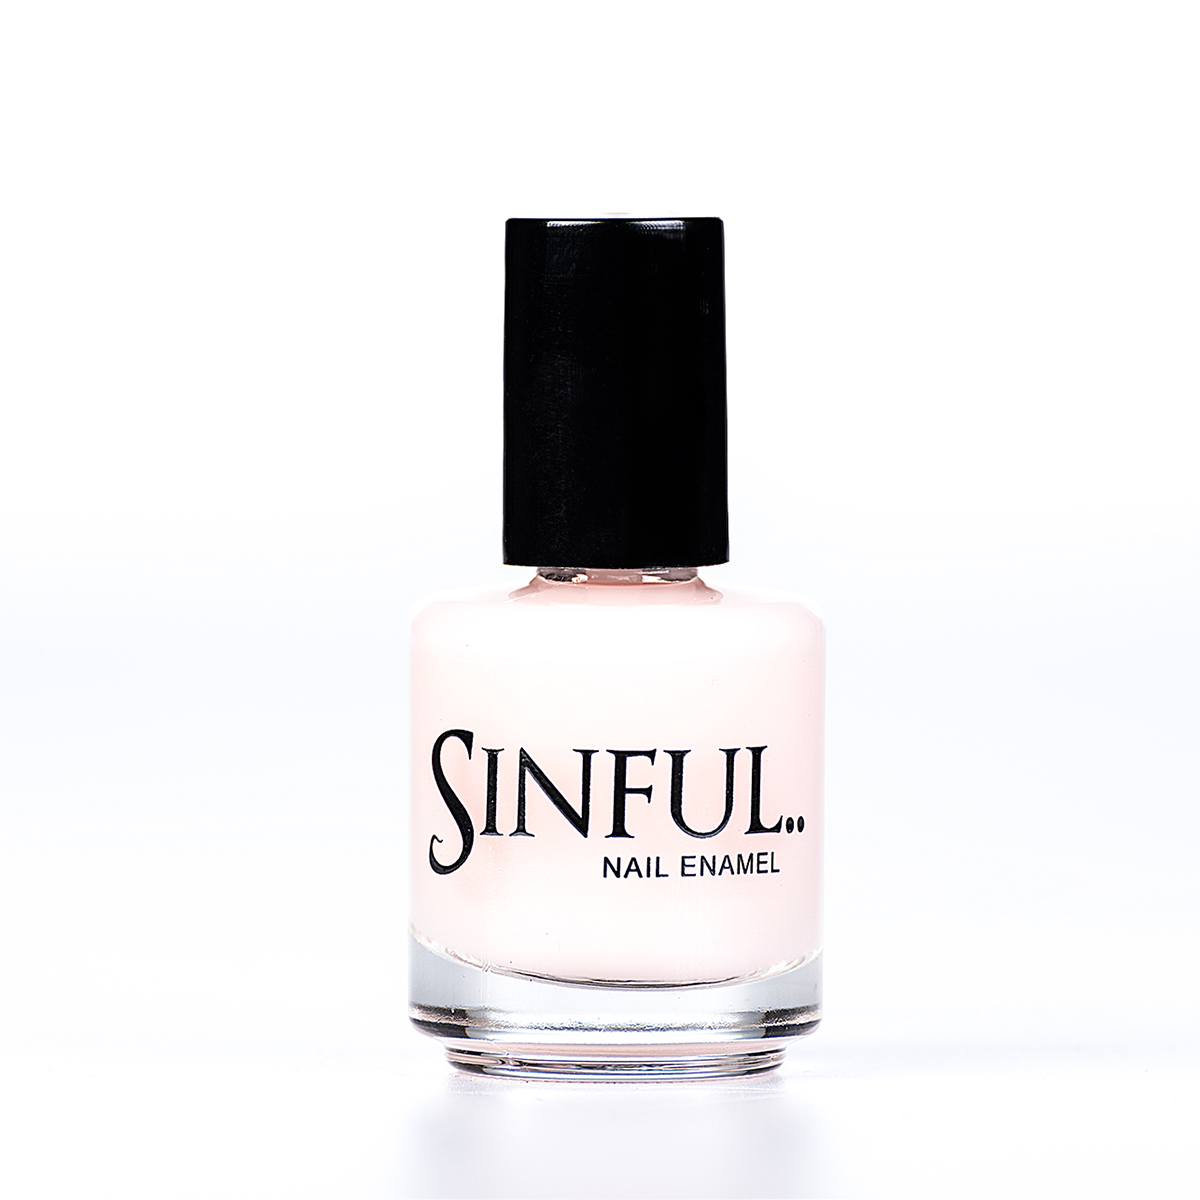 Undercover A matte base coat, protects your nails from any colour dying and gives a smooth base to work on. This polish can also be used as a top coat to give a dusty matte finish effect. 15ml